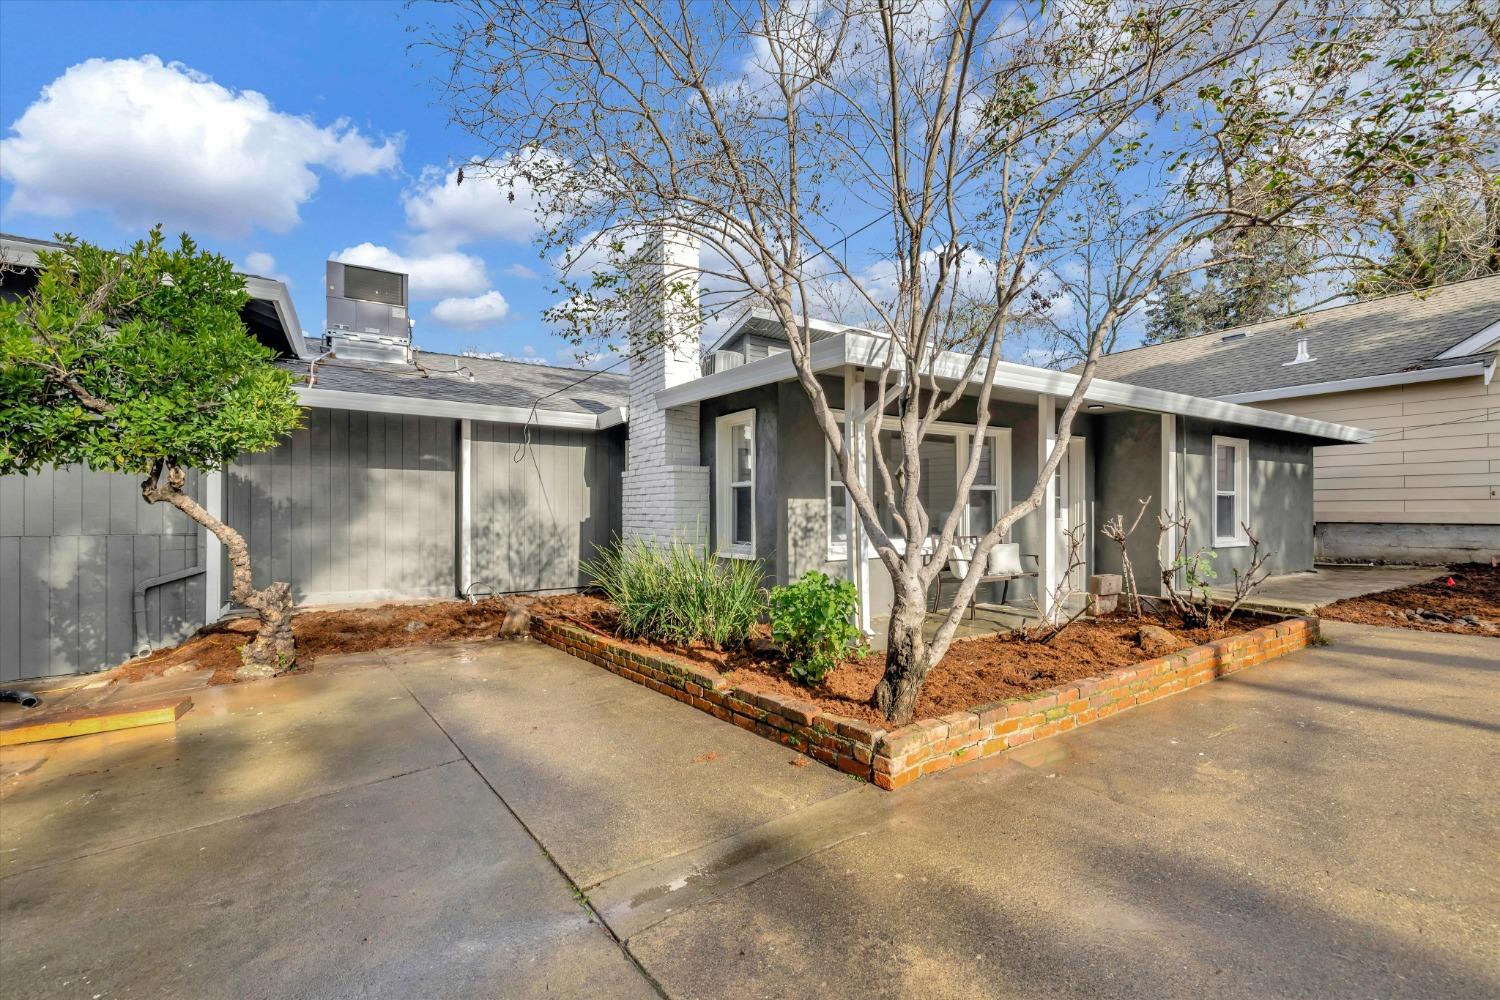 Welcome to your dream home in the desirable city of Fair Oaks! This recently renovated 4-bedroom, 3-